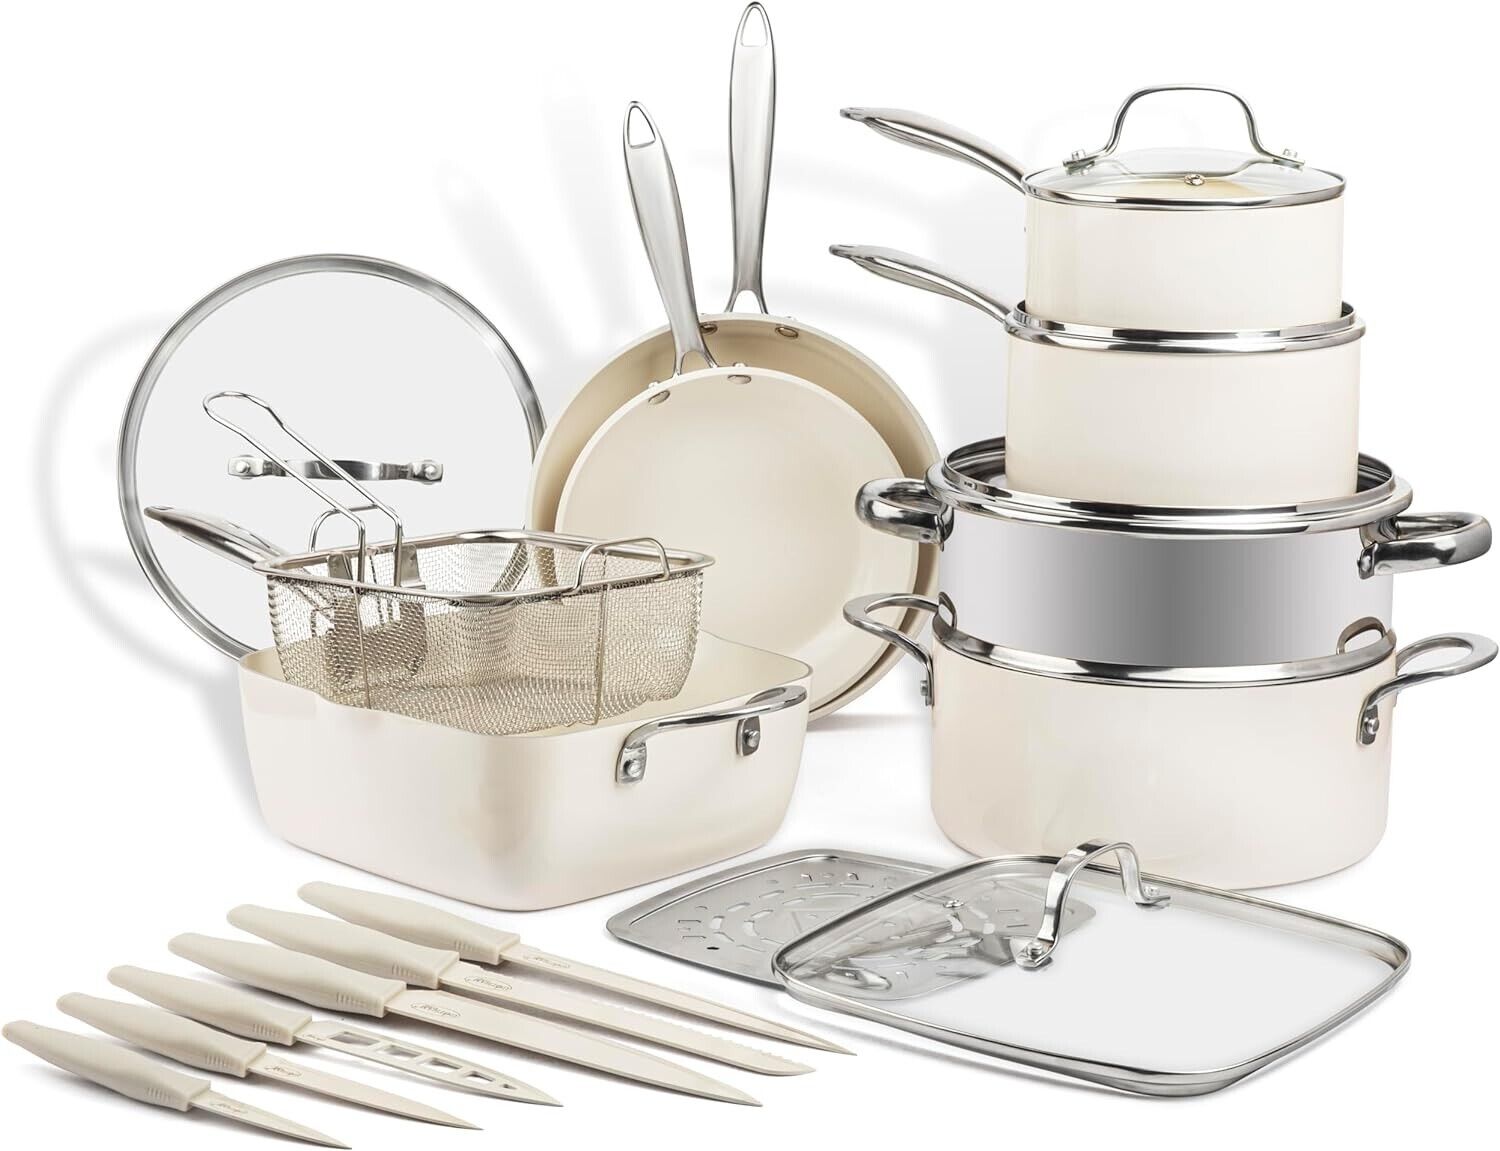 Gotham Steel Cream 20 Pc Nonstick Cookware Set with Knife set and Steamer